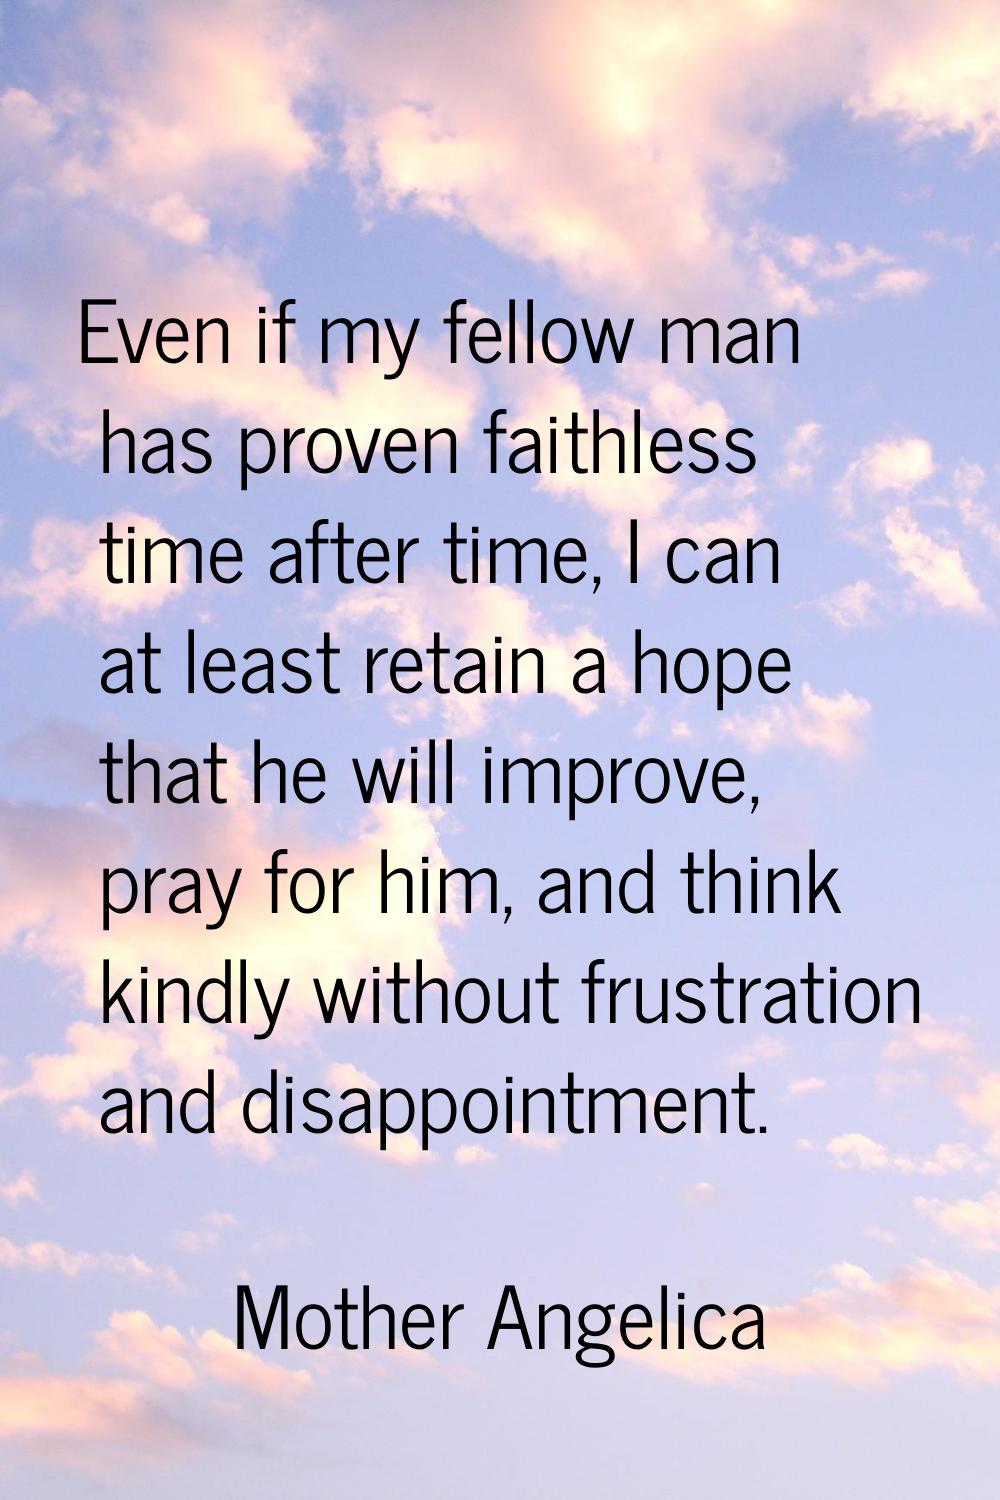 Even if my fellow man has proven faithless time after time, I can at least retain a hope that he wi